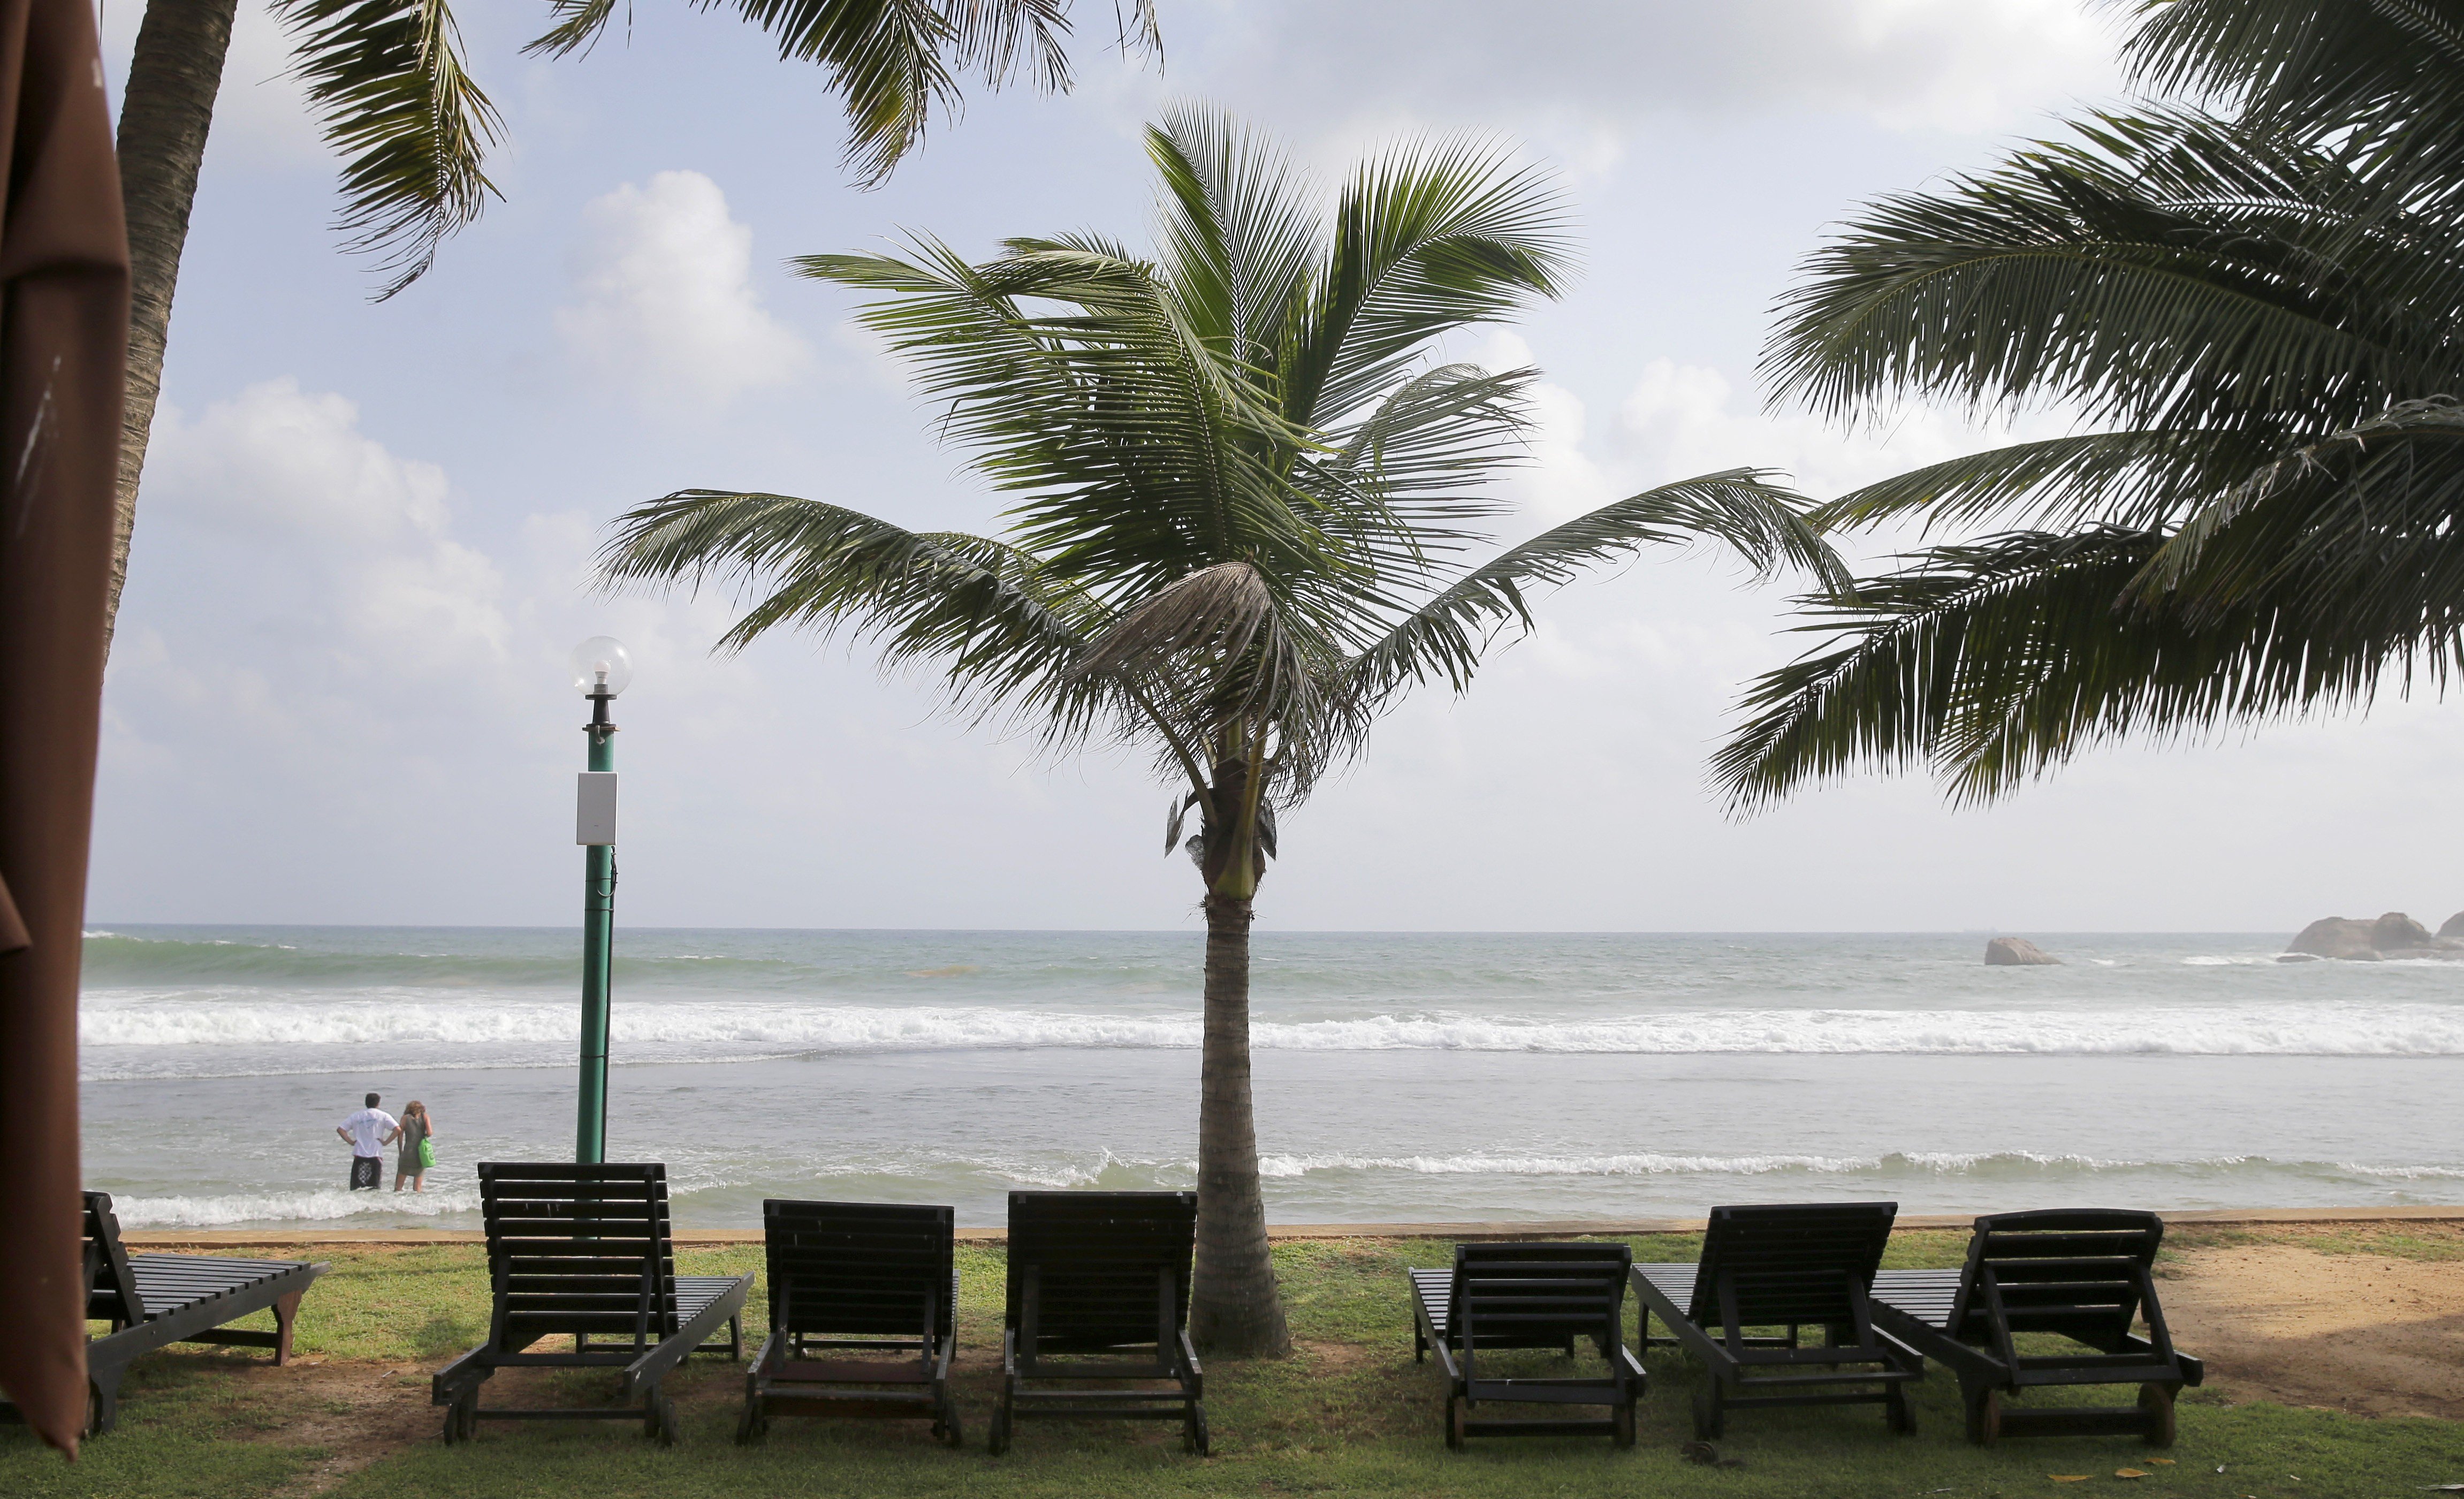 A beach in Hikkaduwa in southwest Sri Lanka, a country that was the Lonely Planet guide’s top travel destination for 2019. However, since the Easter Sunday attacks on churches and luxury hotels, foreign tourists have been reluctant to visit. Photo: AP